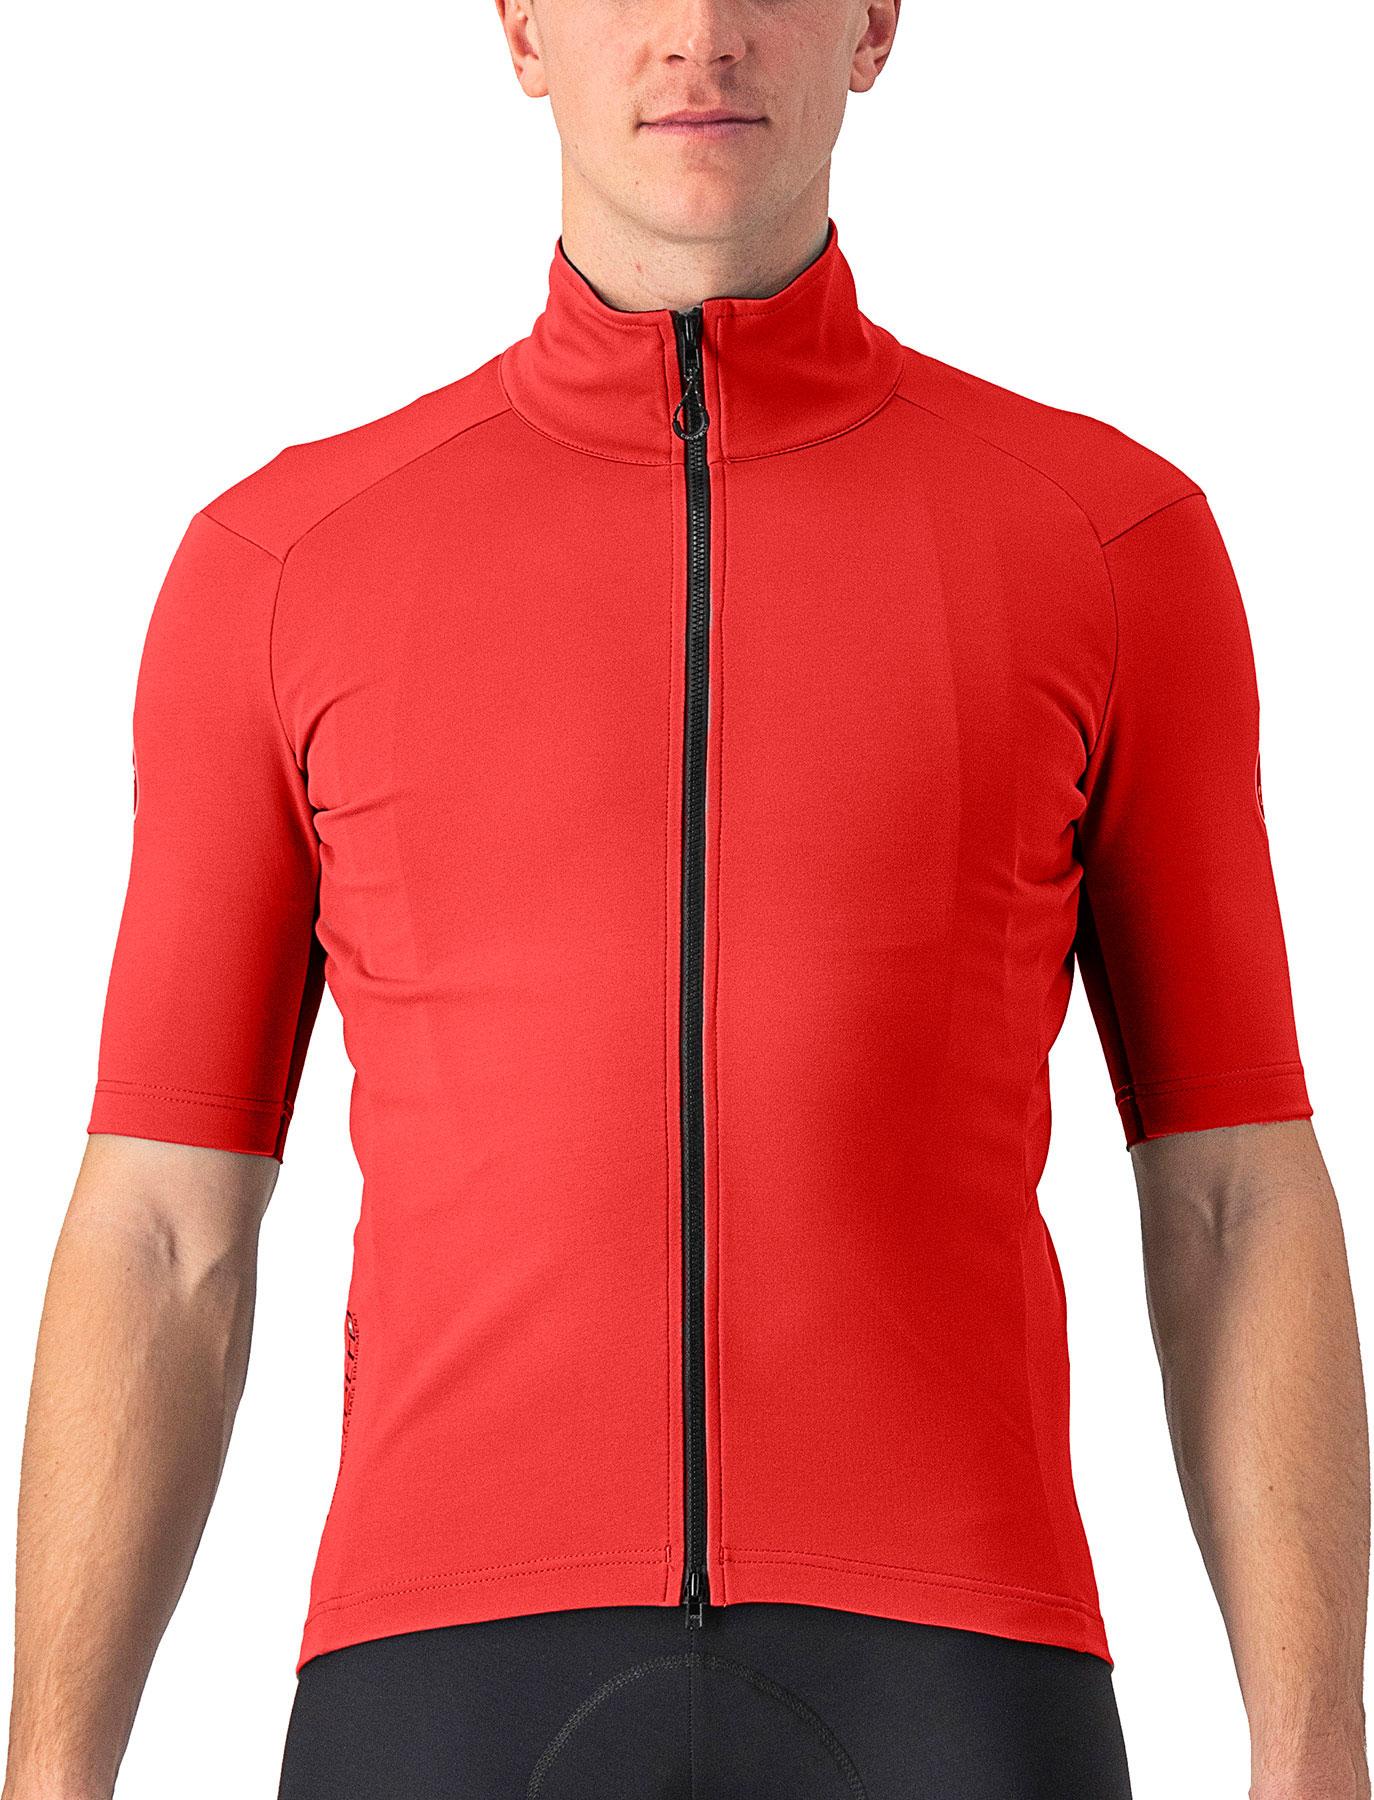 Castelli Perfetto Ros 2 Wind Jersey  Pompeian Red